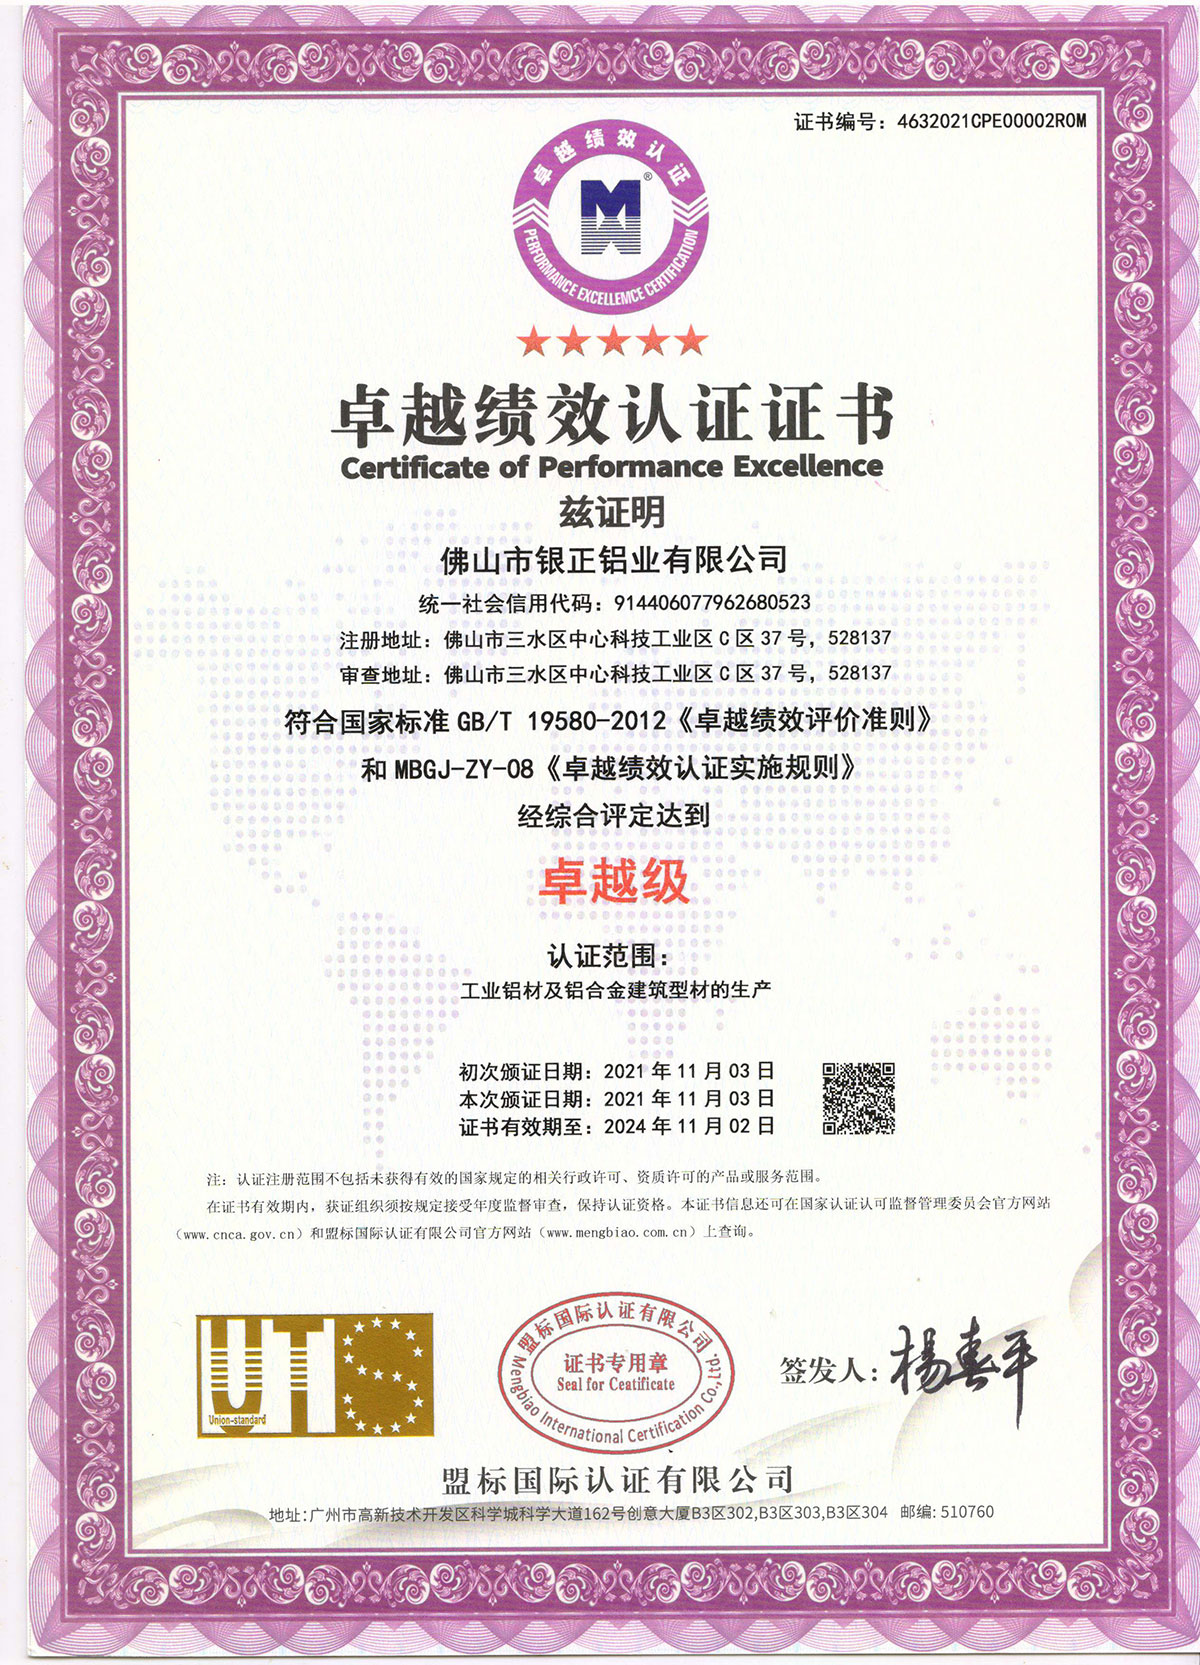 Performance excellence certificate